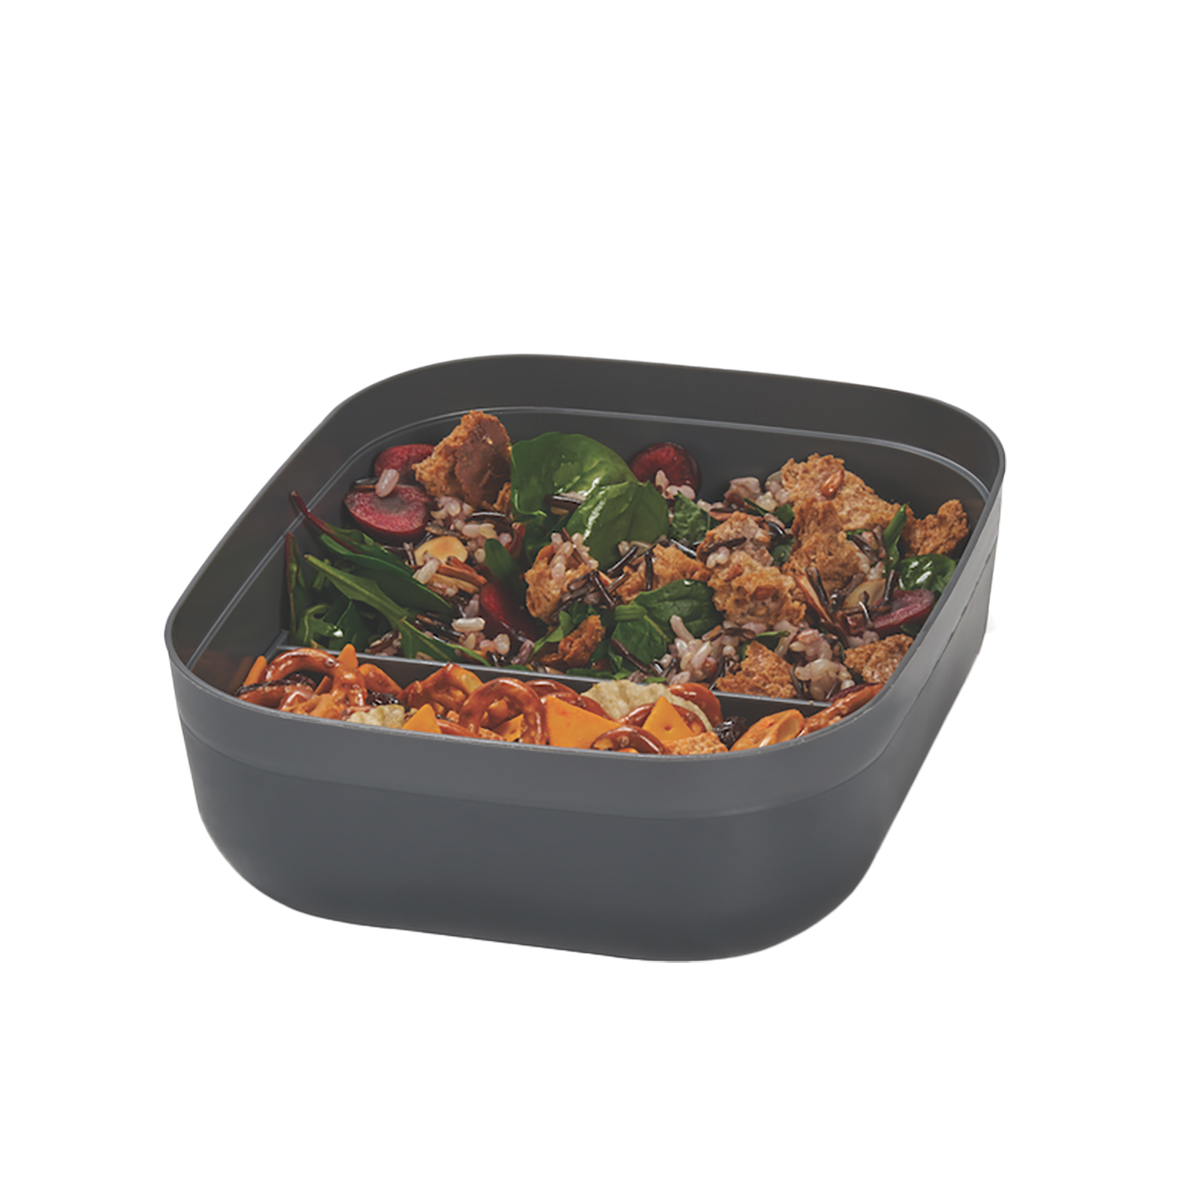 W&P Porter Lunch Box Review: A Meal Prep Game Changer